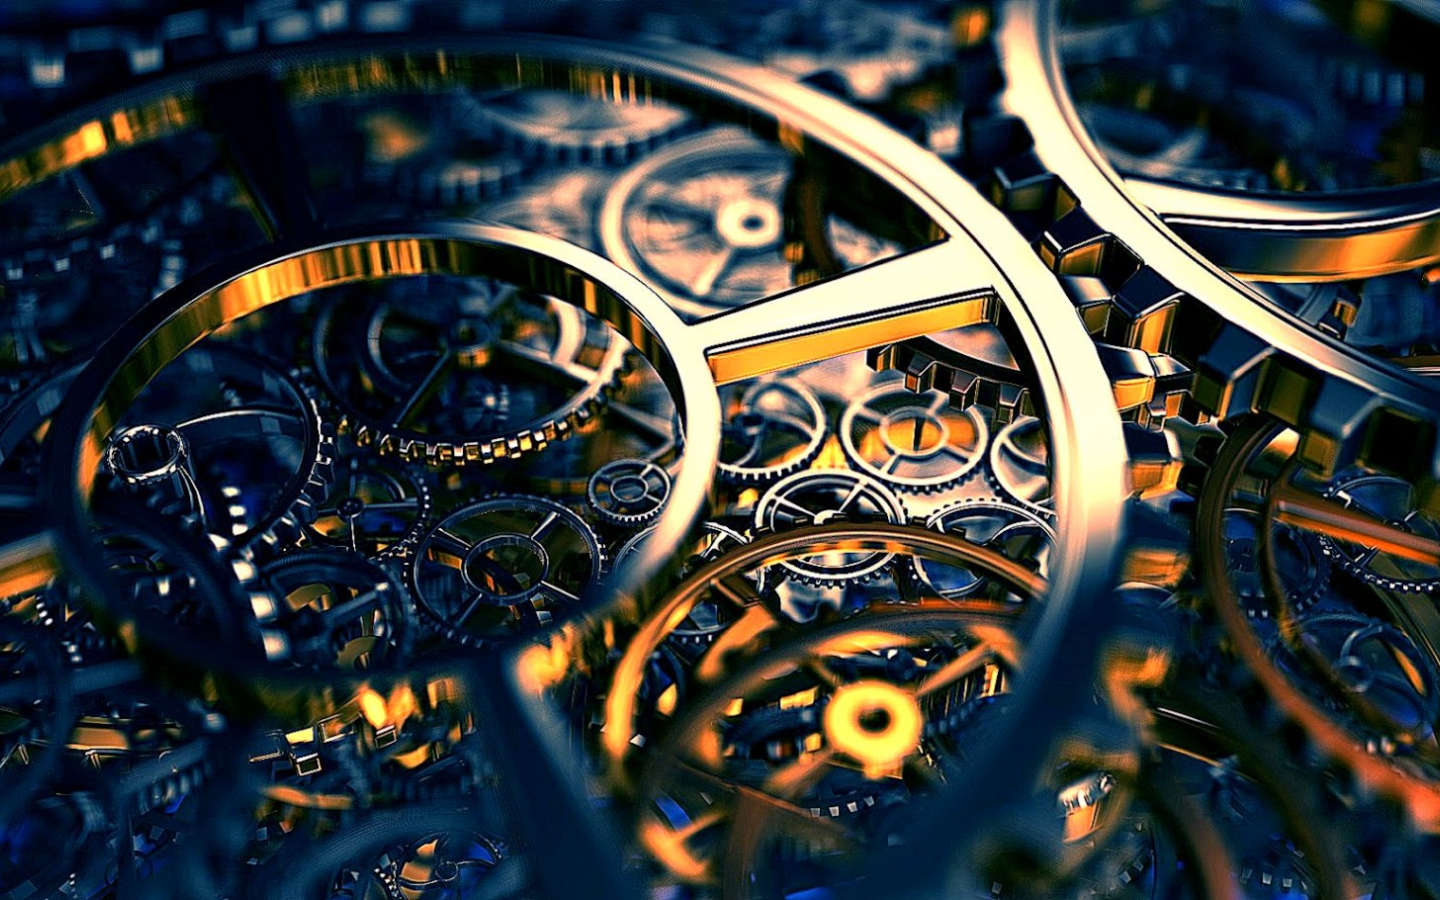 Steampunk Phone Wallpapers